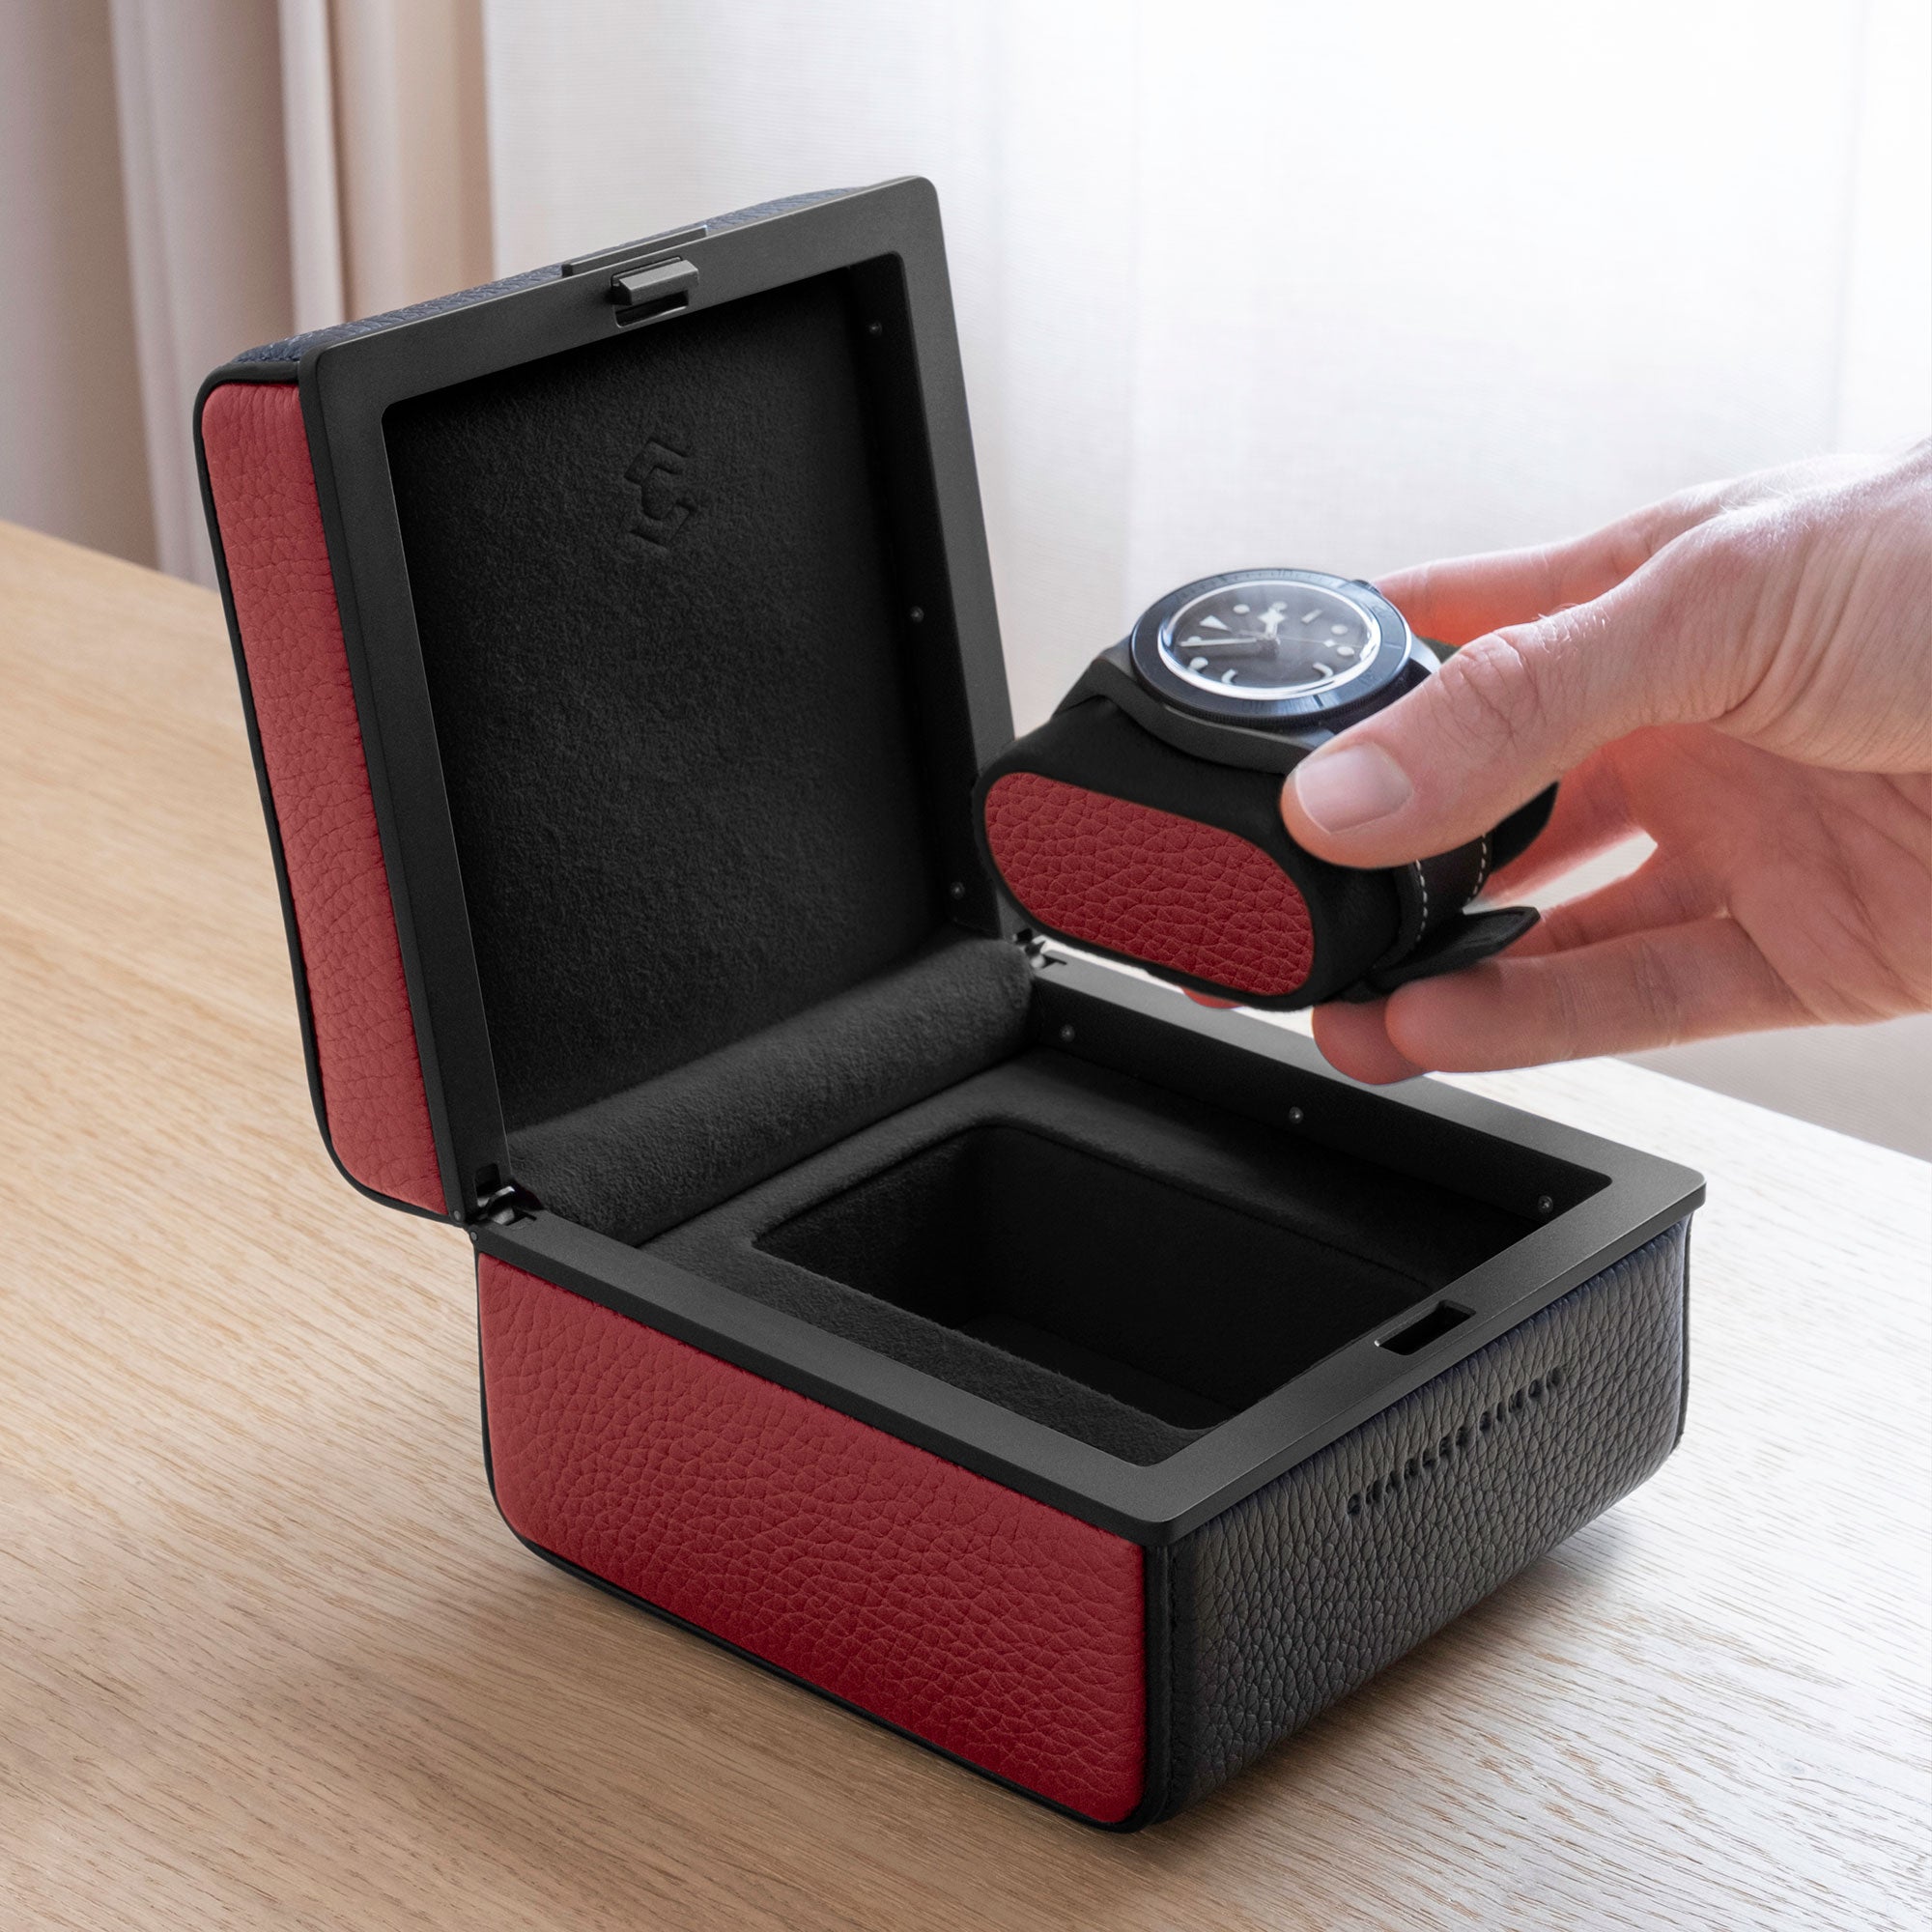 Lifestyle photo of Eaton 1 watch case in black and contrasting red leather. Man is opening luxury watch case with Tagheuer watch placed on Notte and red leather removable watch cushion.